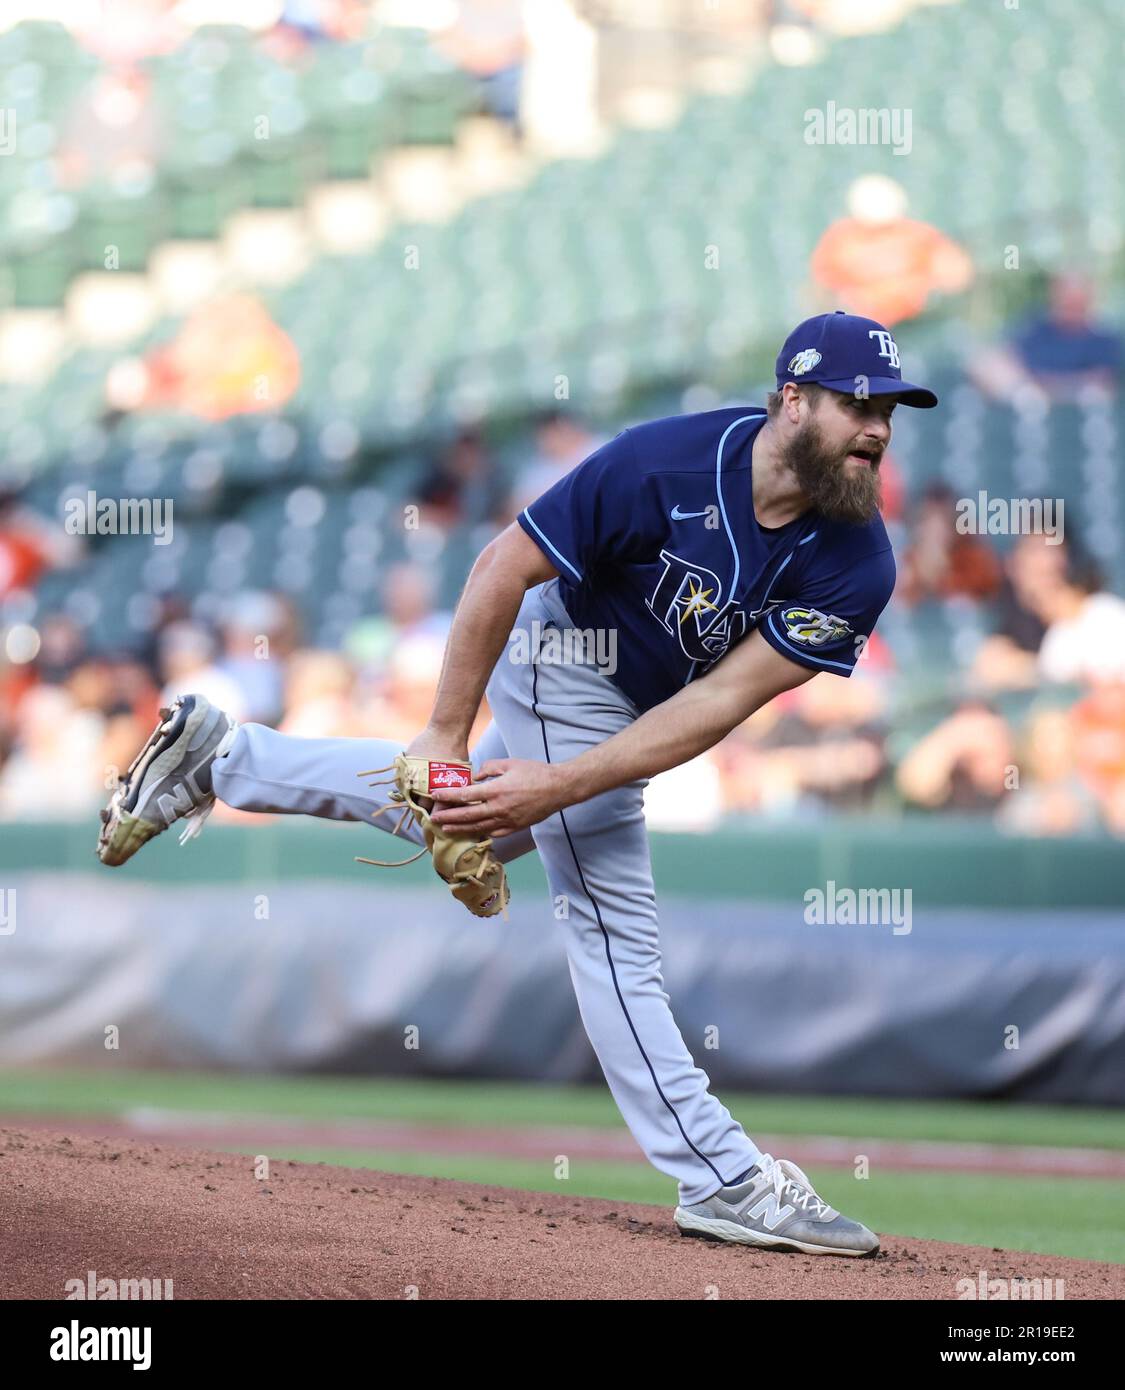 ST. PETERSBURG, FL - APR 10: Jalen Beeks (68) of the Rays delivers a pitch  to the plate during the MLB regular season game between the Baltimore  Orioles and the Tampa Bay